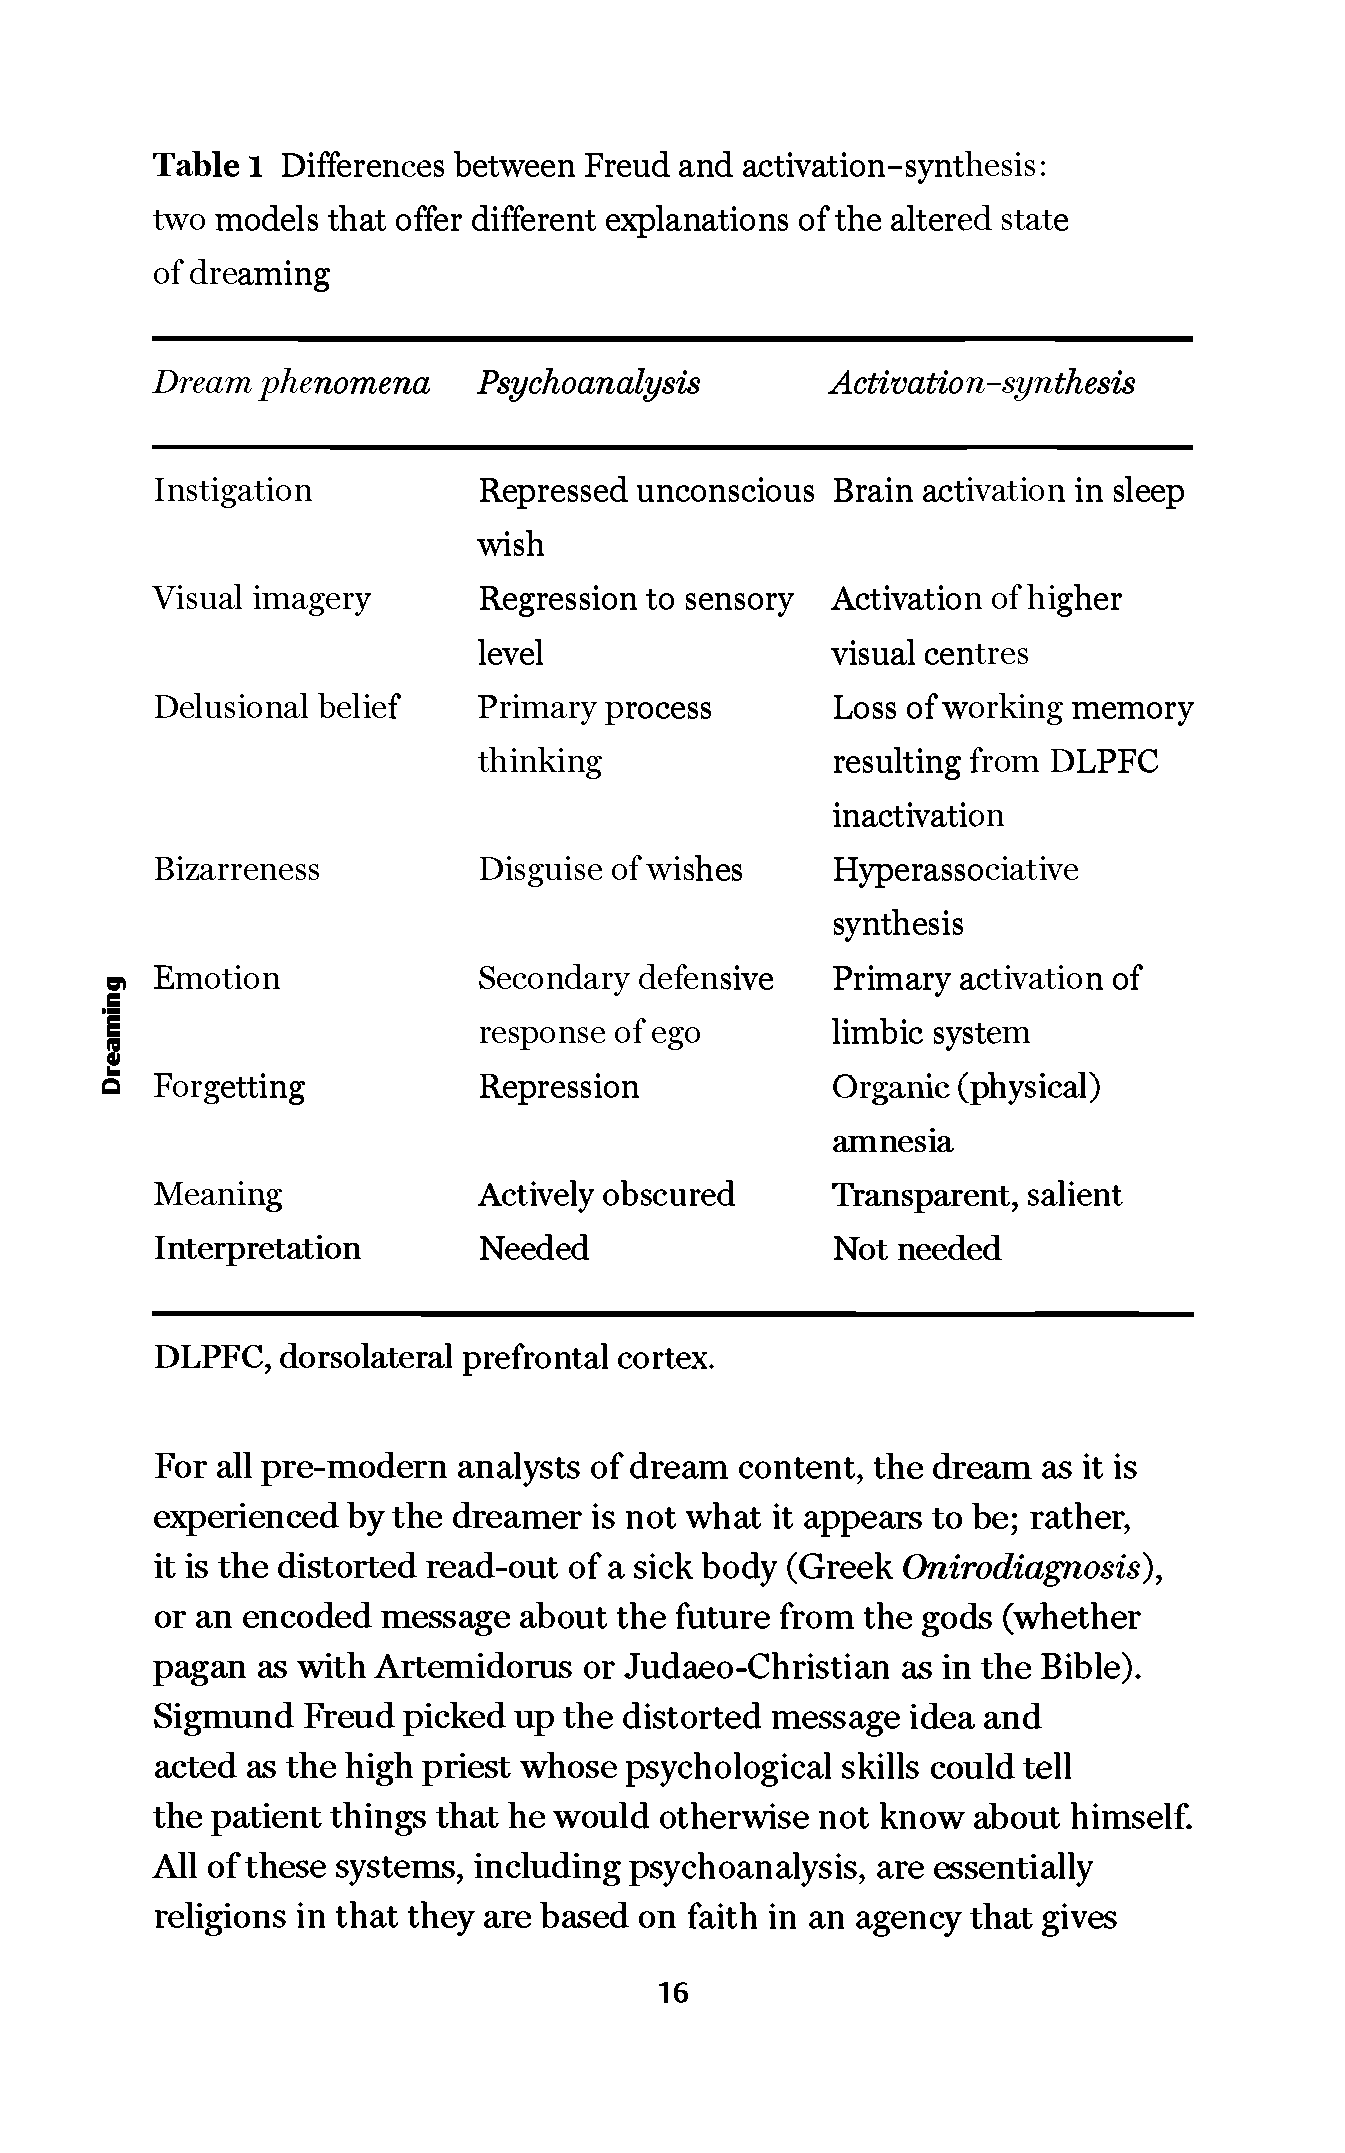 Table 1 Differences between Freud and activation-synthesis two models that offer different explanations of the altered state of dreaming...